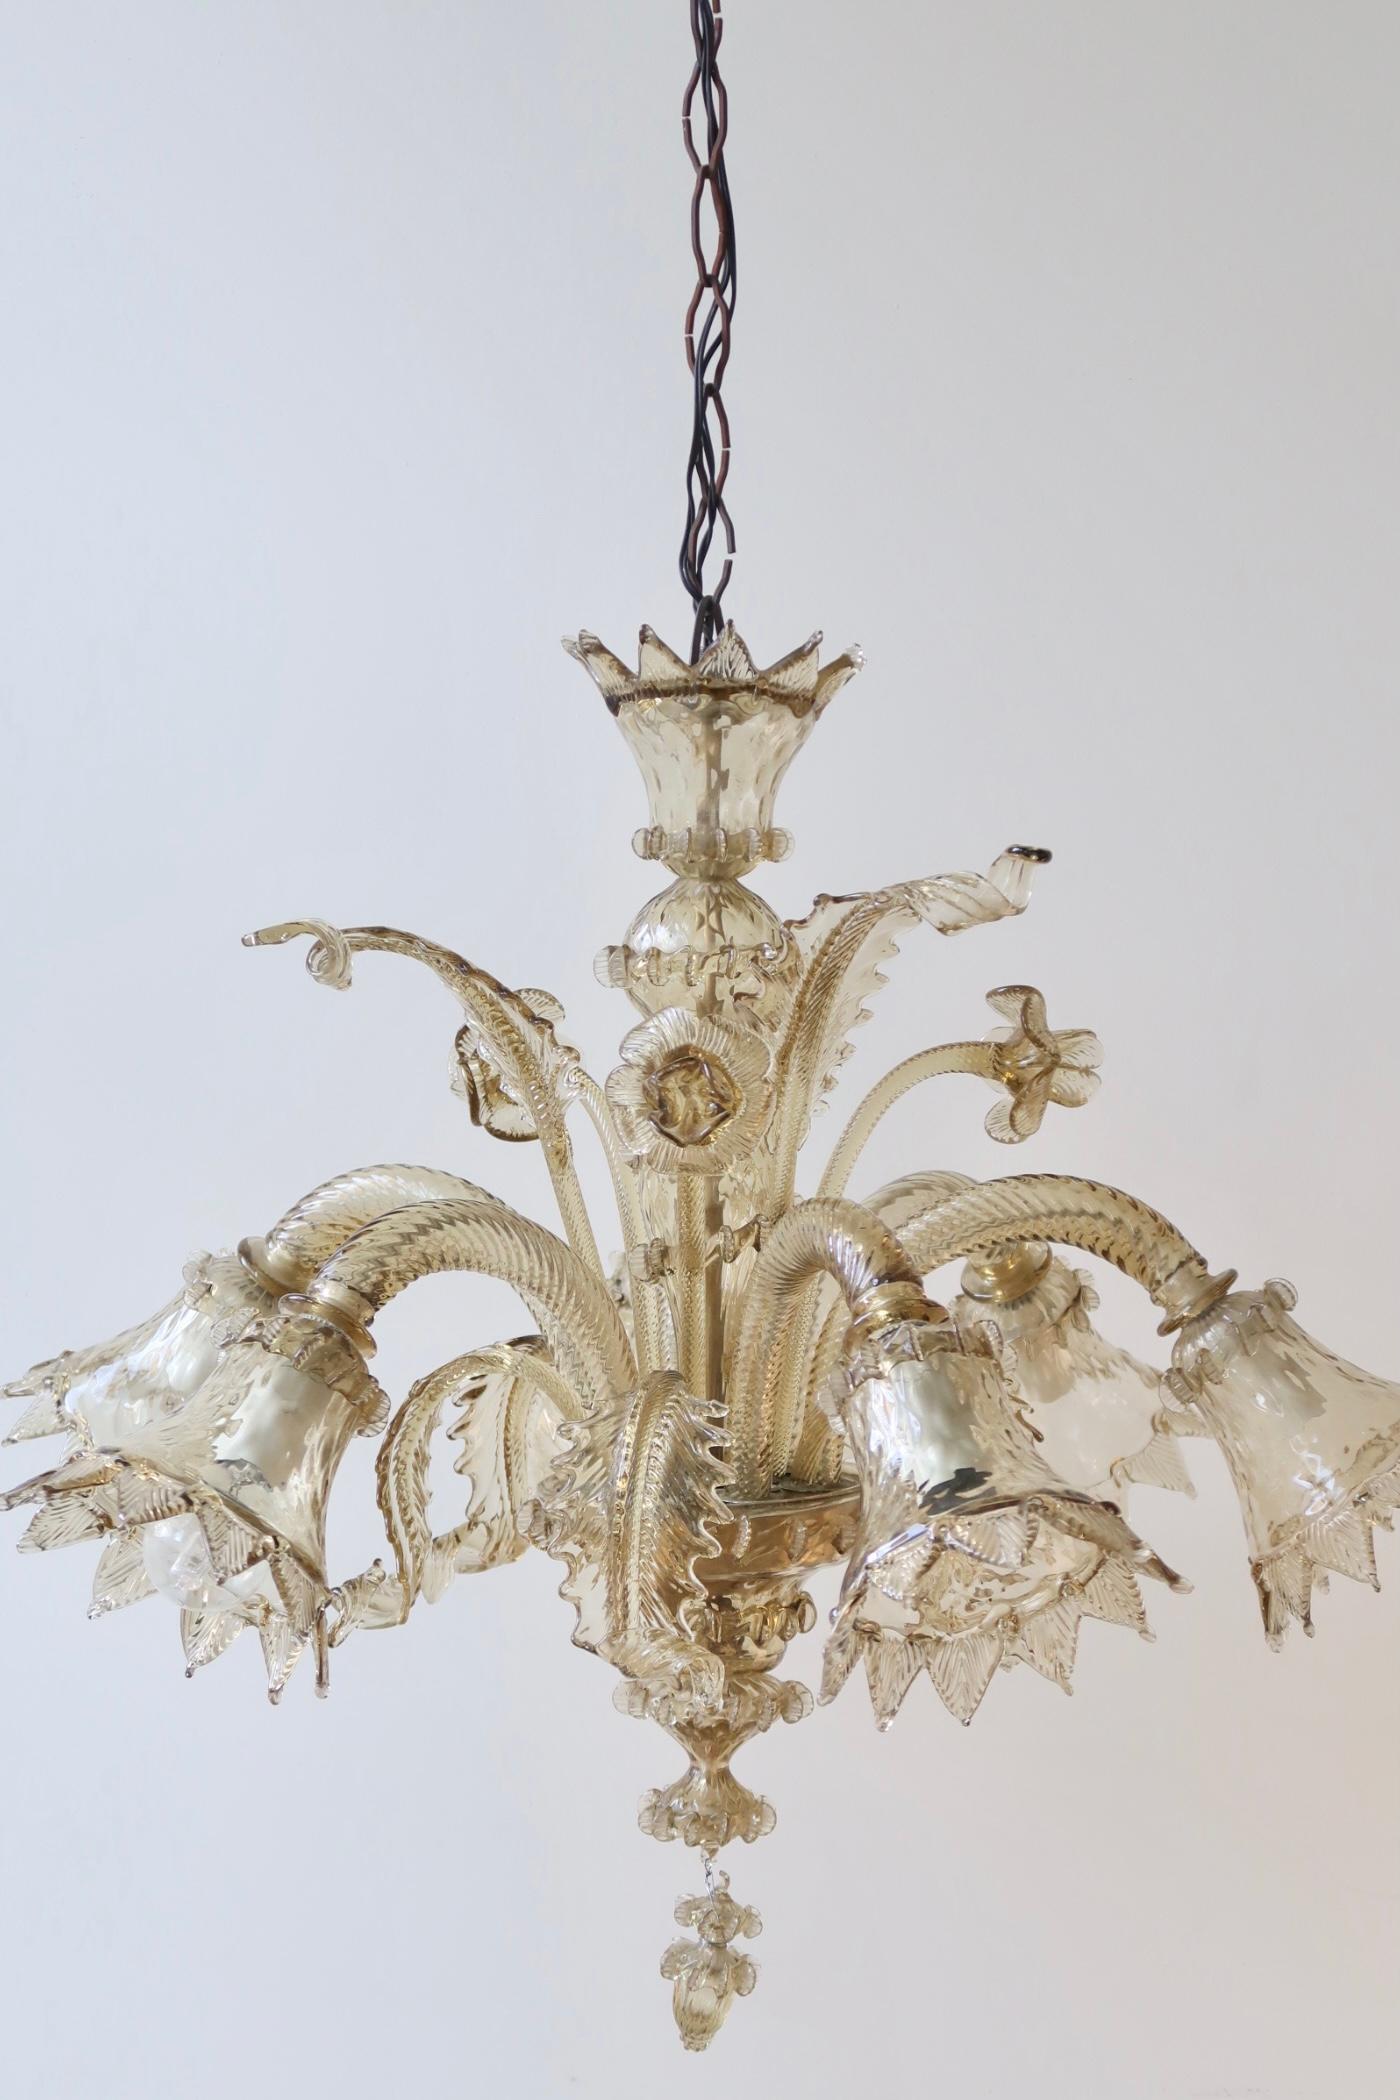 Beautiful vintage Murano chandelier.

The chandelier is made of hand blown golden glass and consists of 6 arms, each with its own light source. Incredibly detailed with mouth blown flowers and leaves. The techniques used are most often seen at